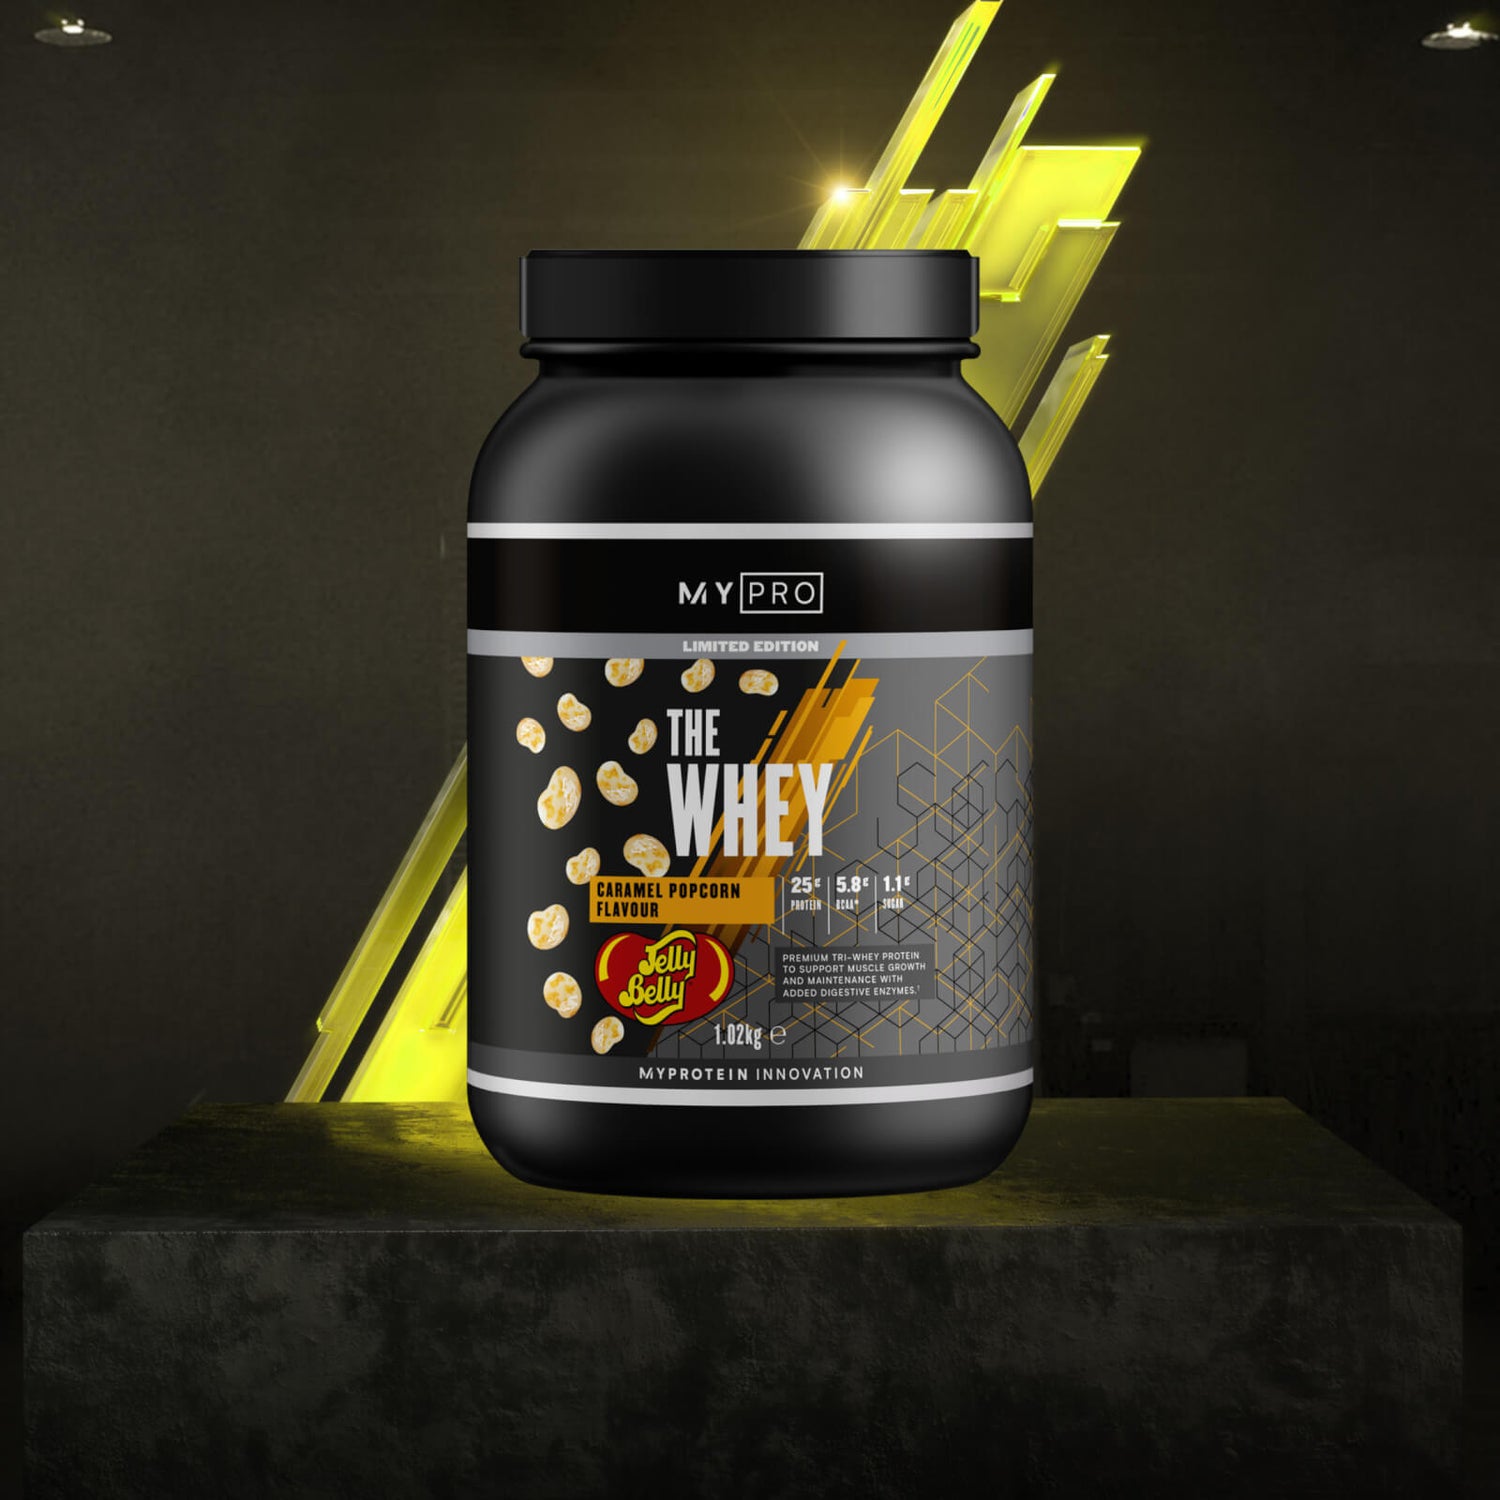 „THE Whey“ - 30servings - Jelly Belly - Caramel Popcorn